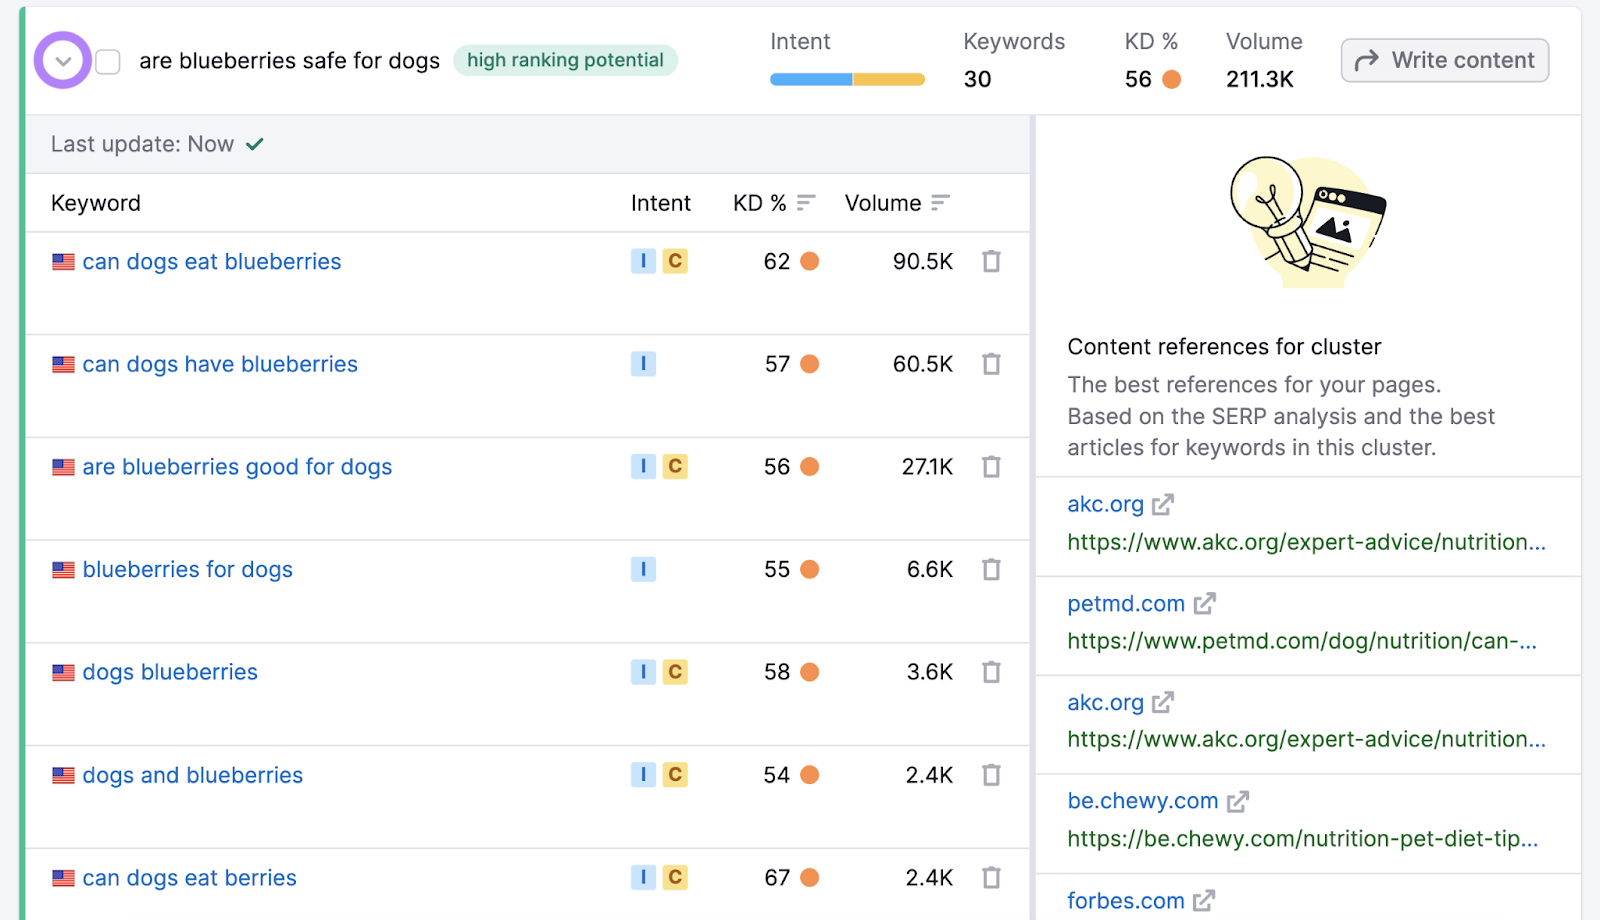 Keywords shown for "are blueberries safe for dogs" cluster in Keyword Manager